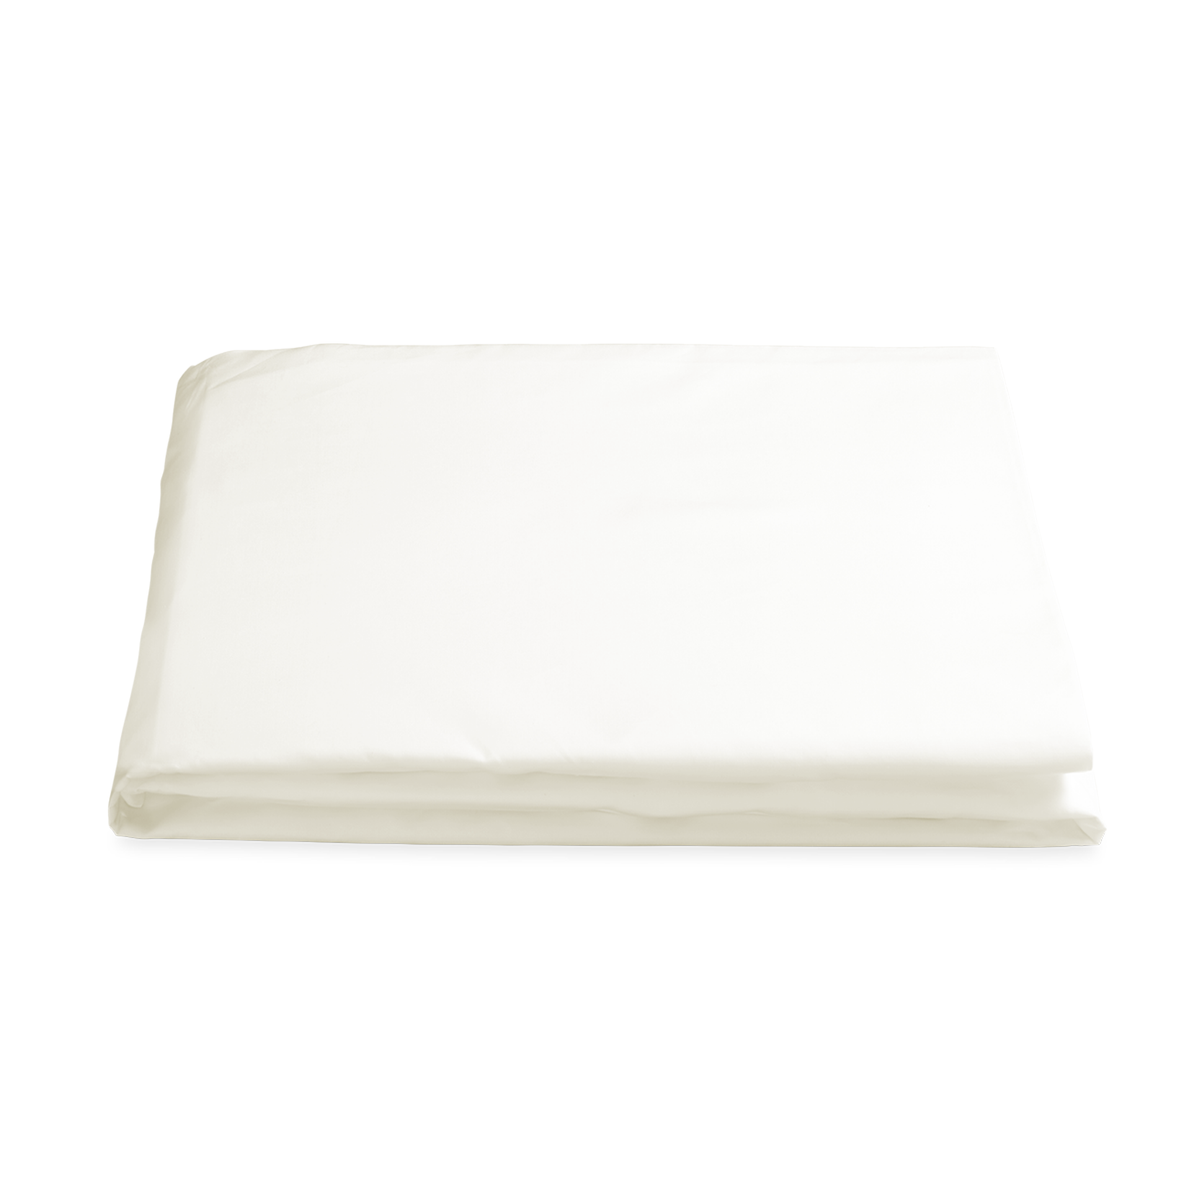 Folded Fitted Sheet of Matouk Milano Hemstitch Bedding in Color Ivory